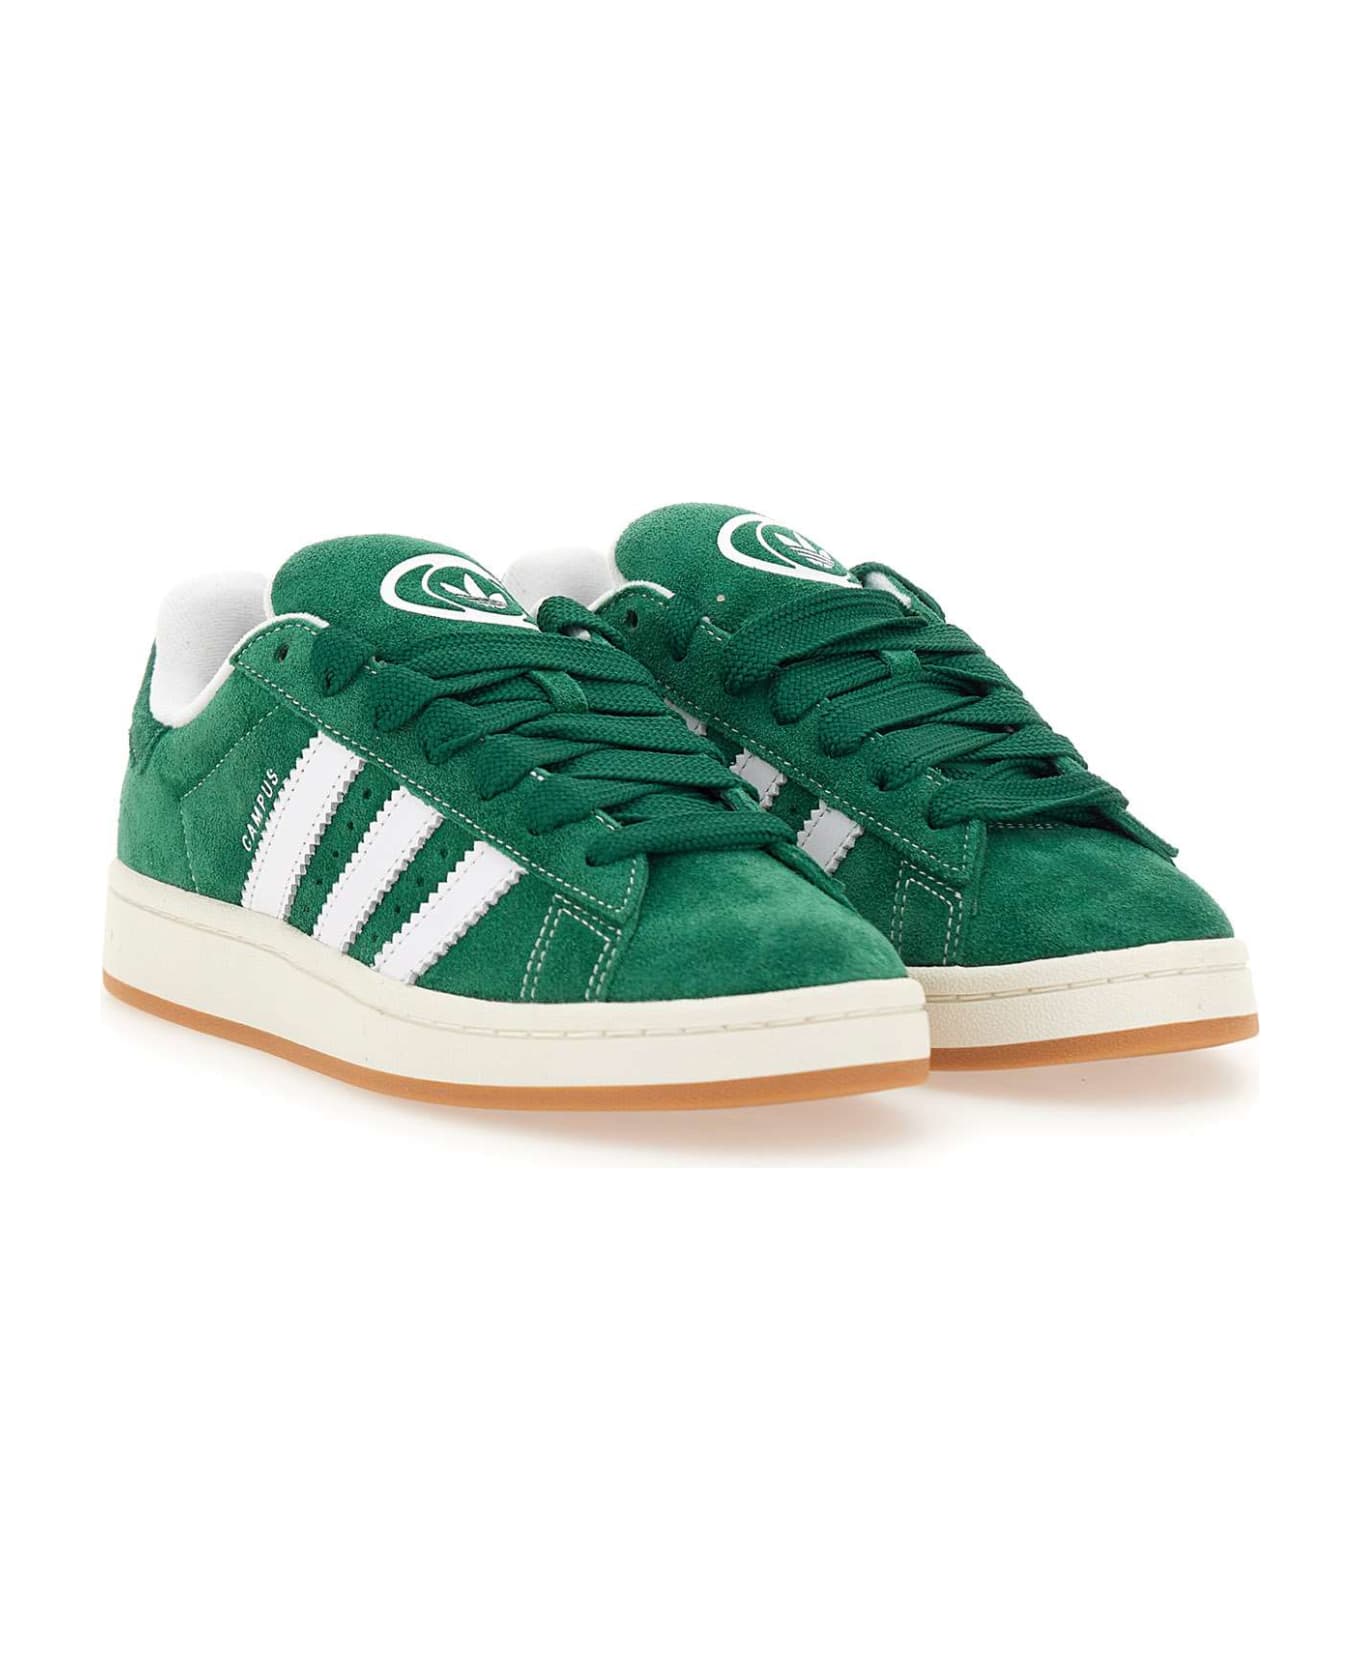 Adidas 'campus 00s' Sneakers - Drkgrn Ftwwht Owhite スニーカー